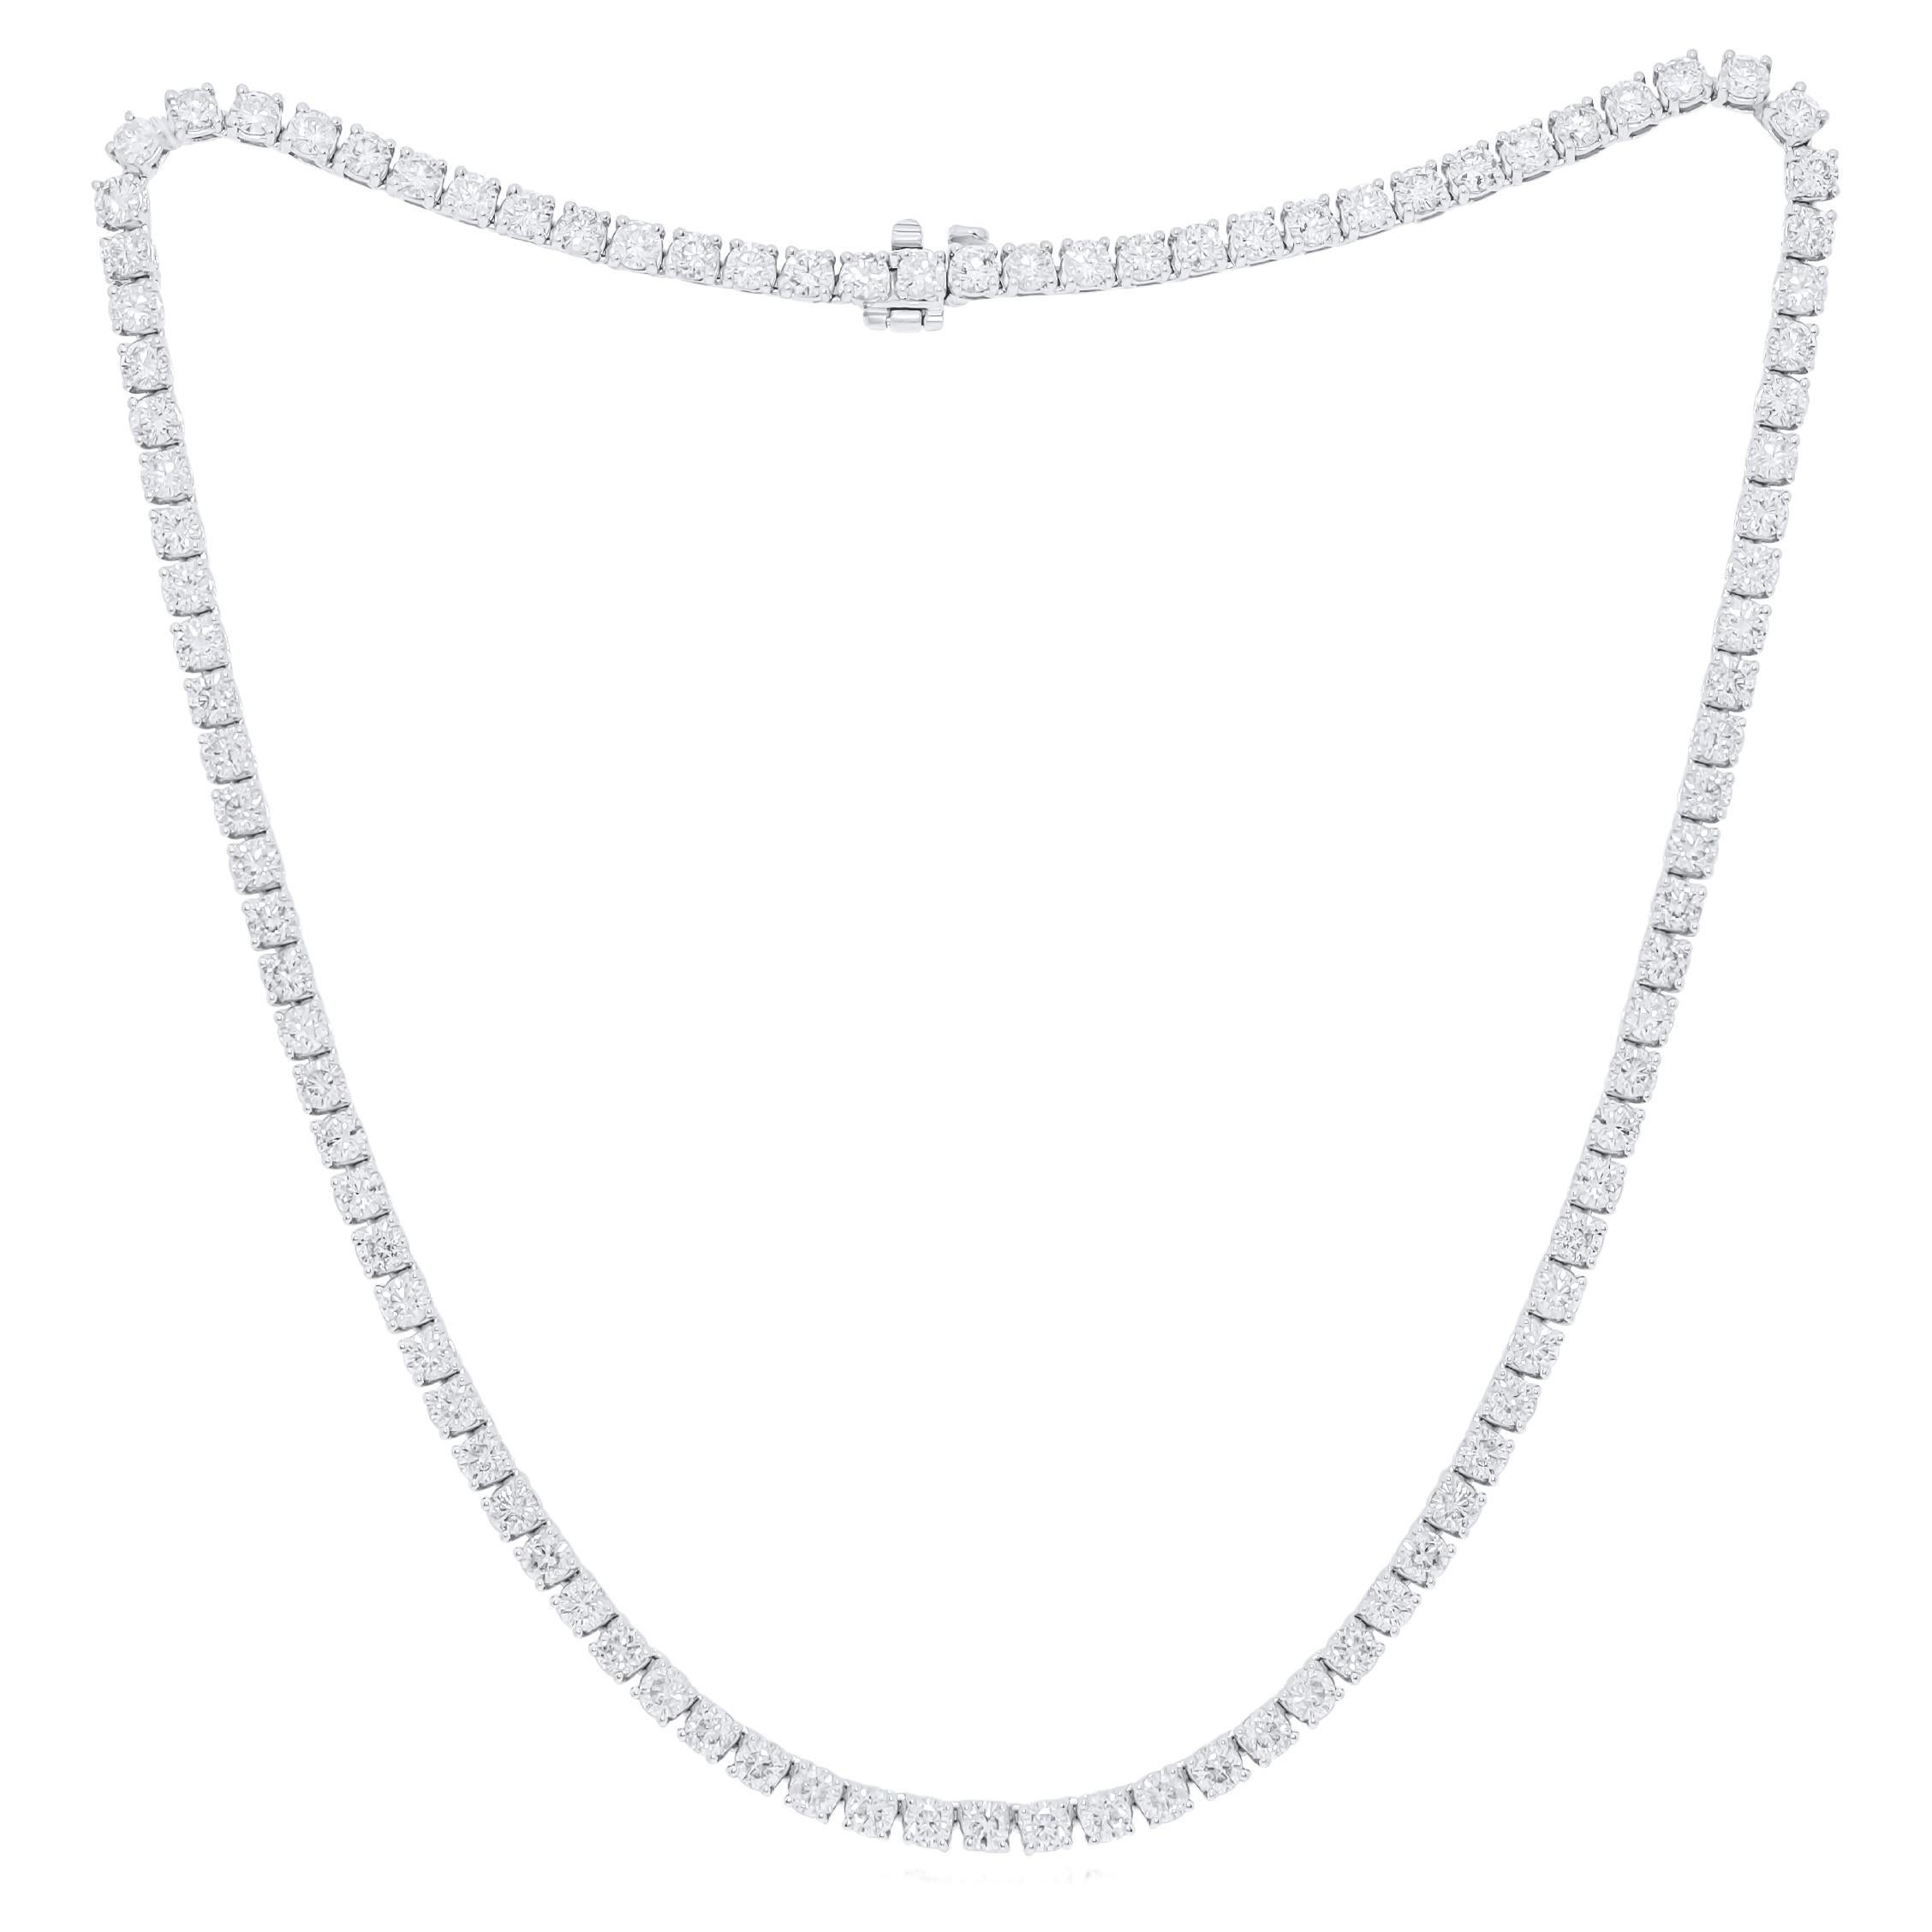 Diana M. Custom 41.00 Cts Round  4 Prong Diamond 18k White Gold Tennis Necklace  For Sale